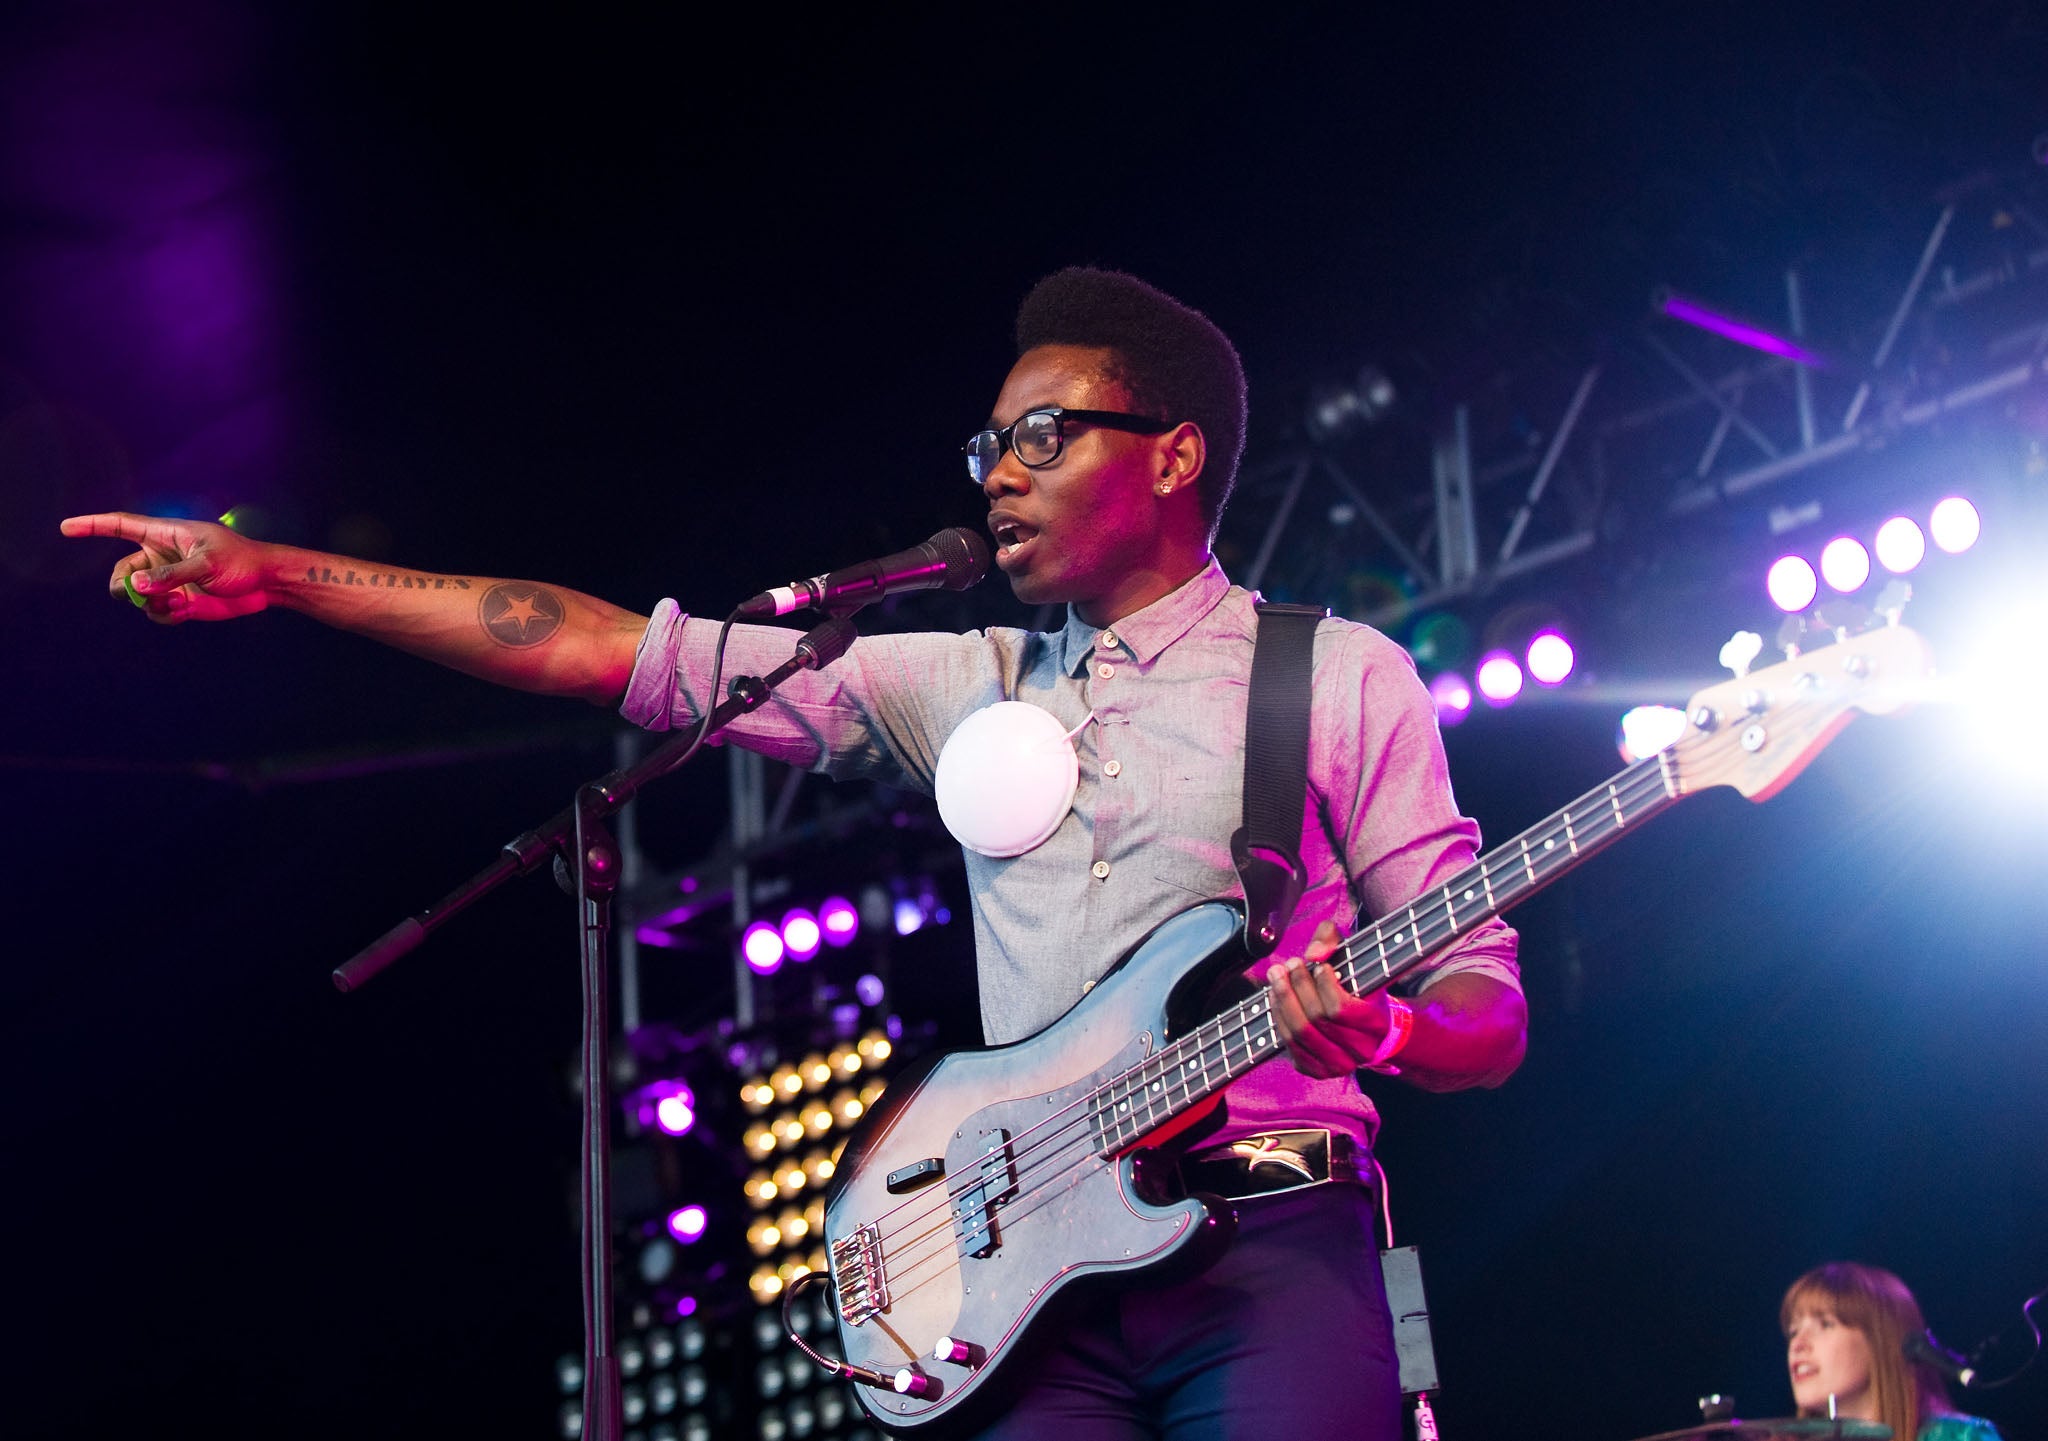 Gbenga Adelekan of Metronomy performs on stage in 2011